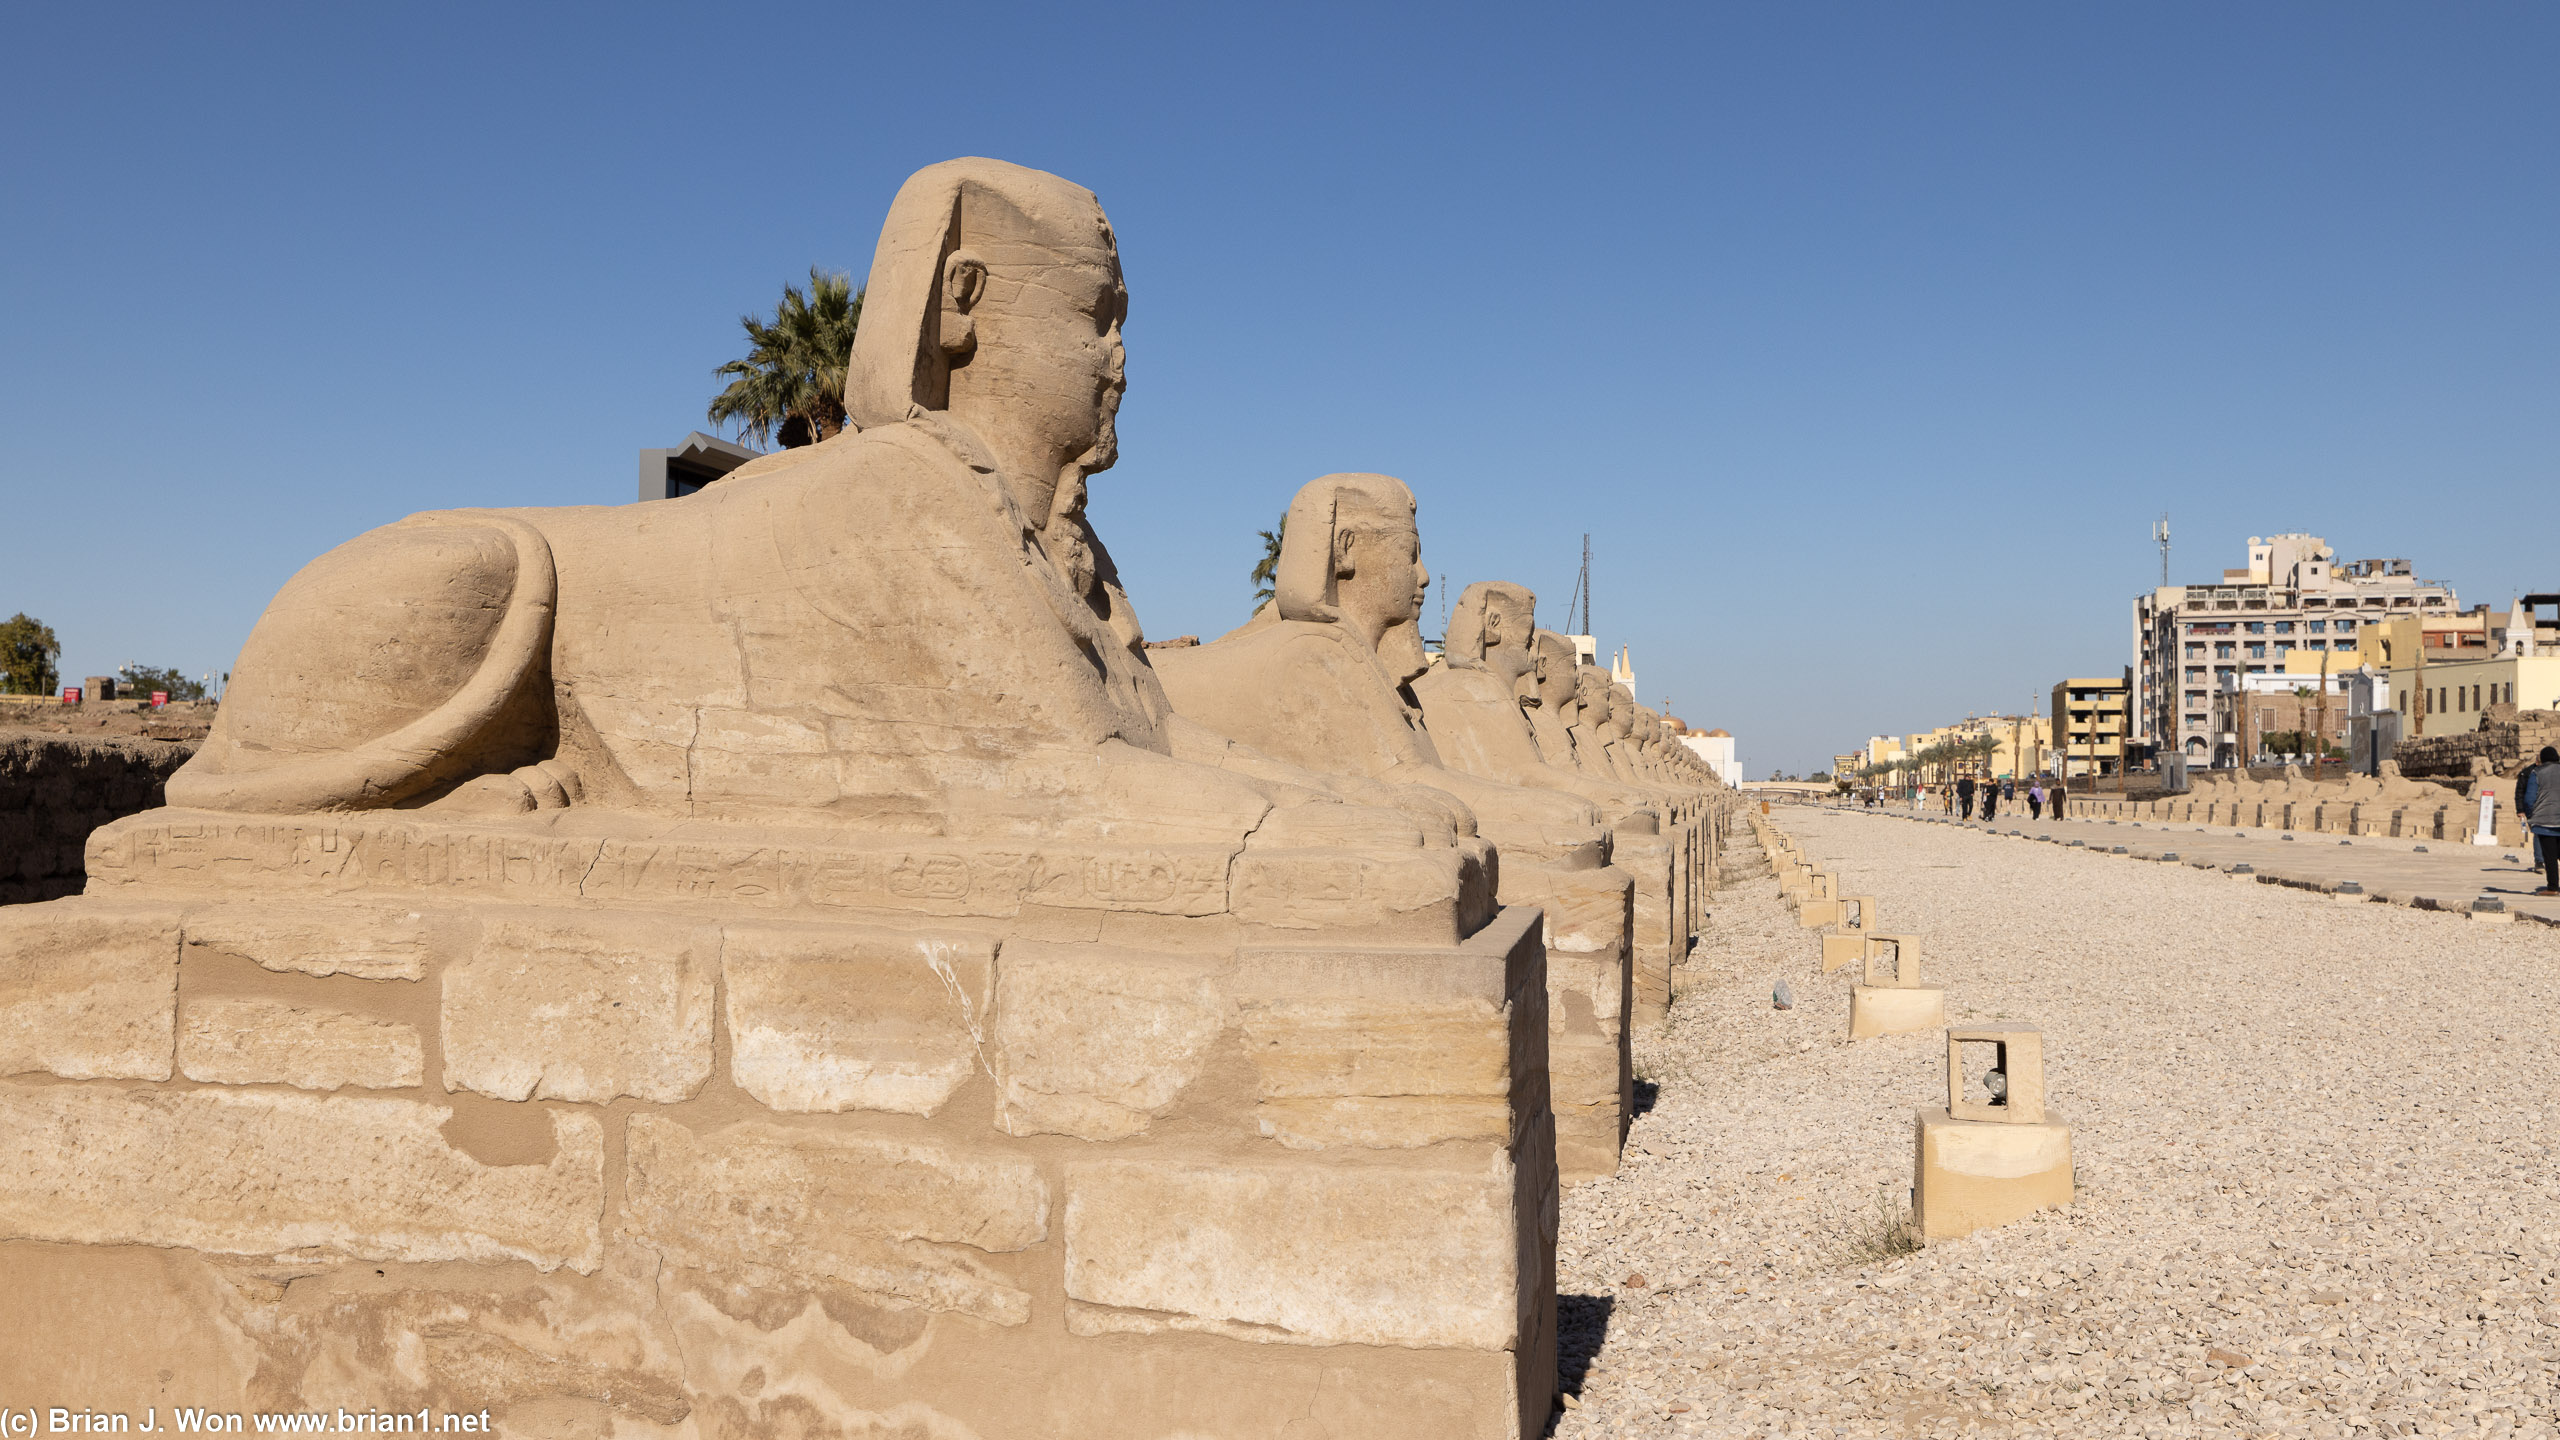 Avenue of Sphinxes connects Luxor and Karnak.